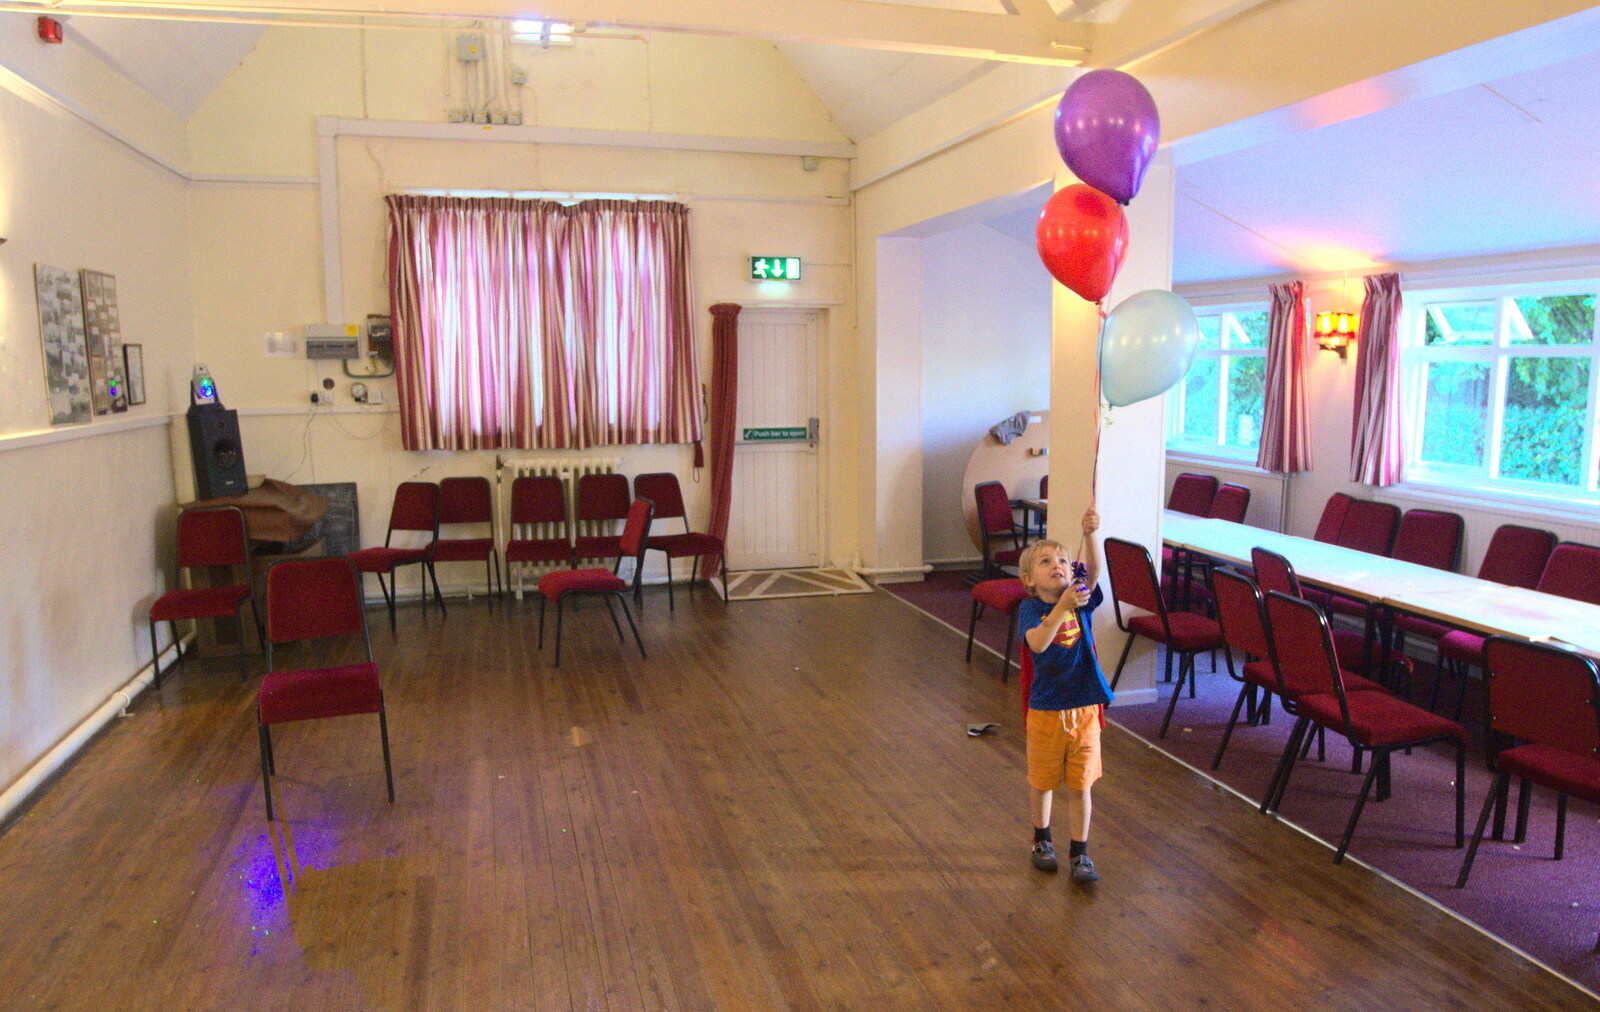 Fred dances alone with balloons from Fred's Fifth Birthday, The Village Hall, Brome, Suffolk - 28th September 2013